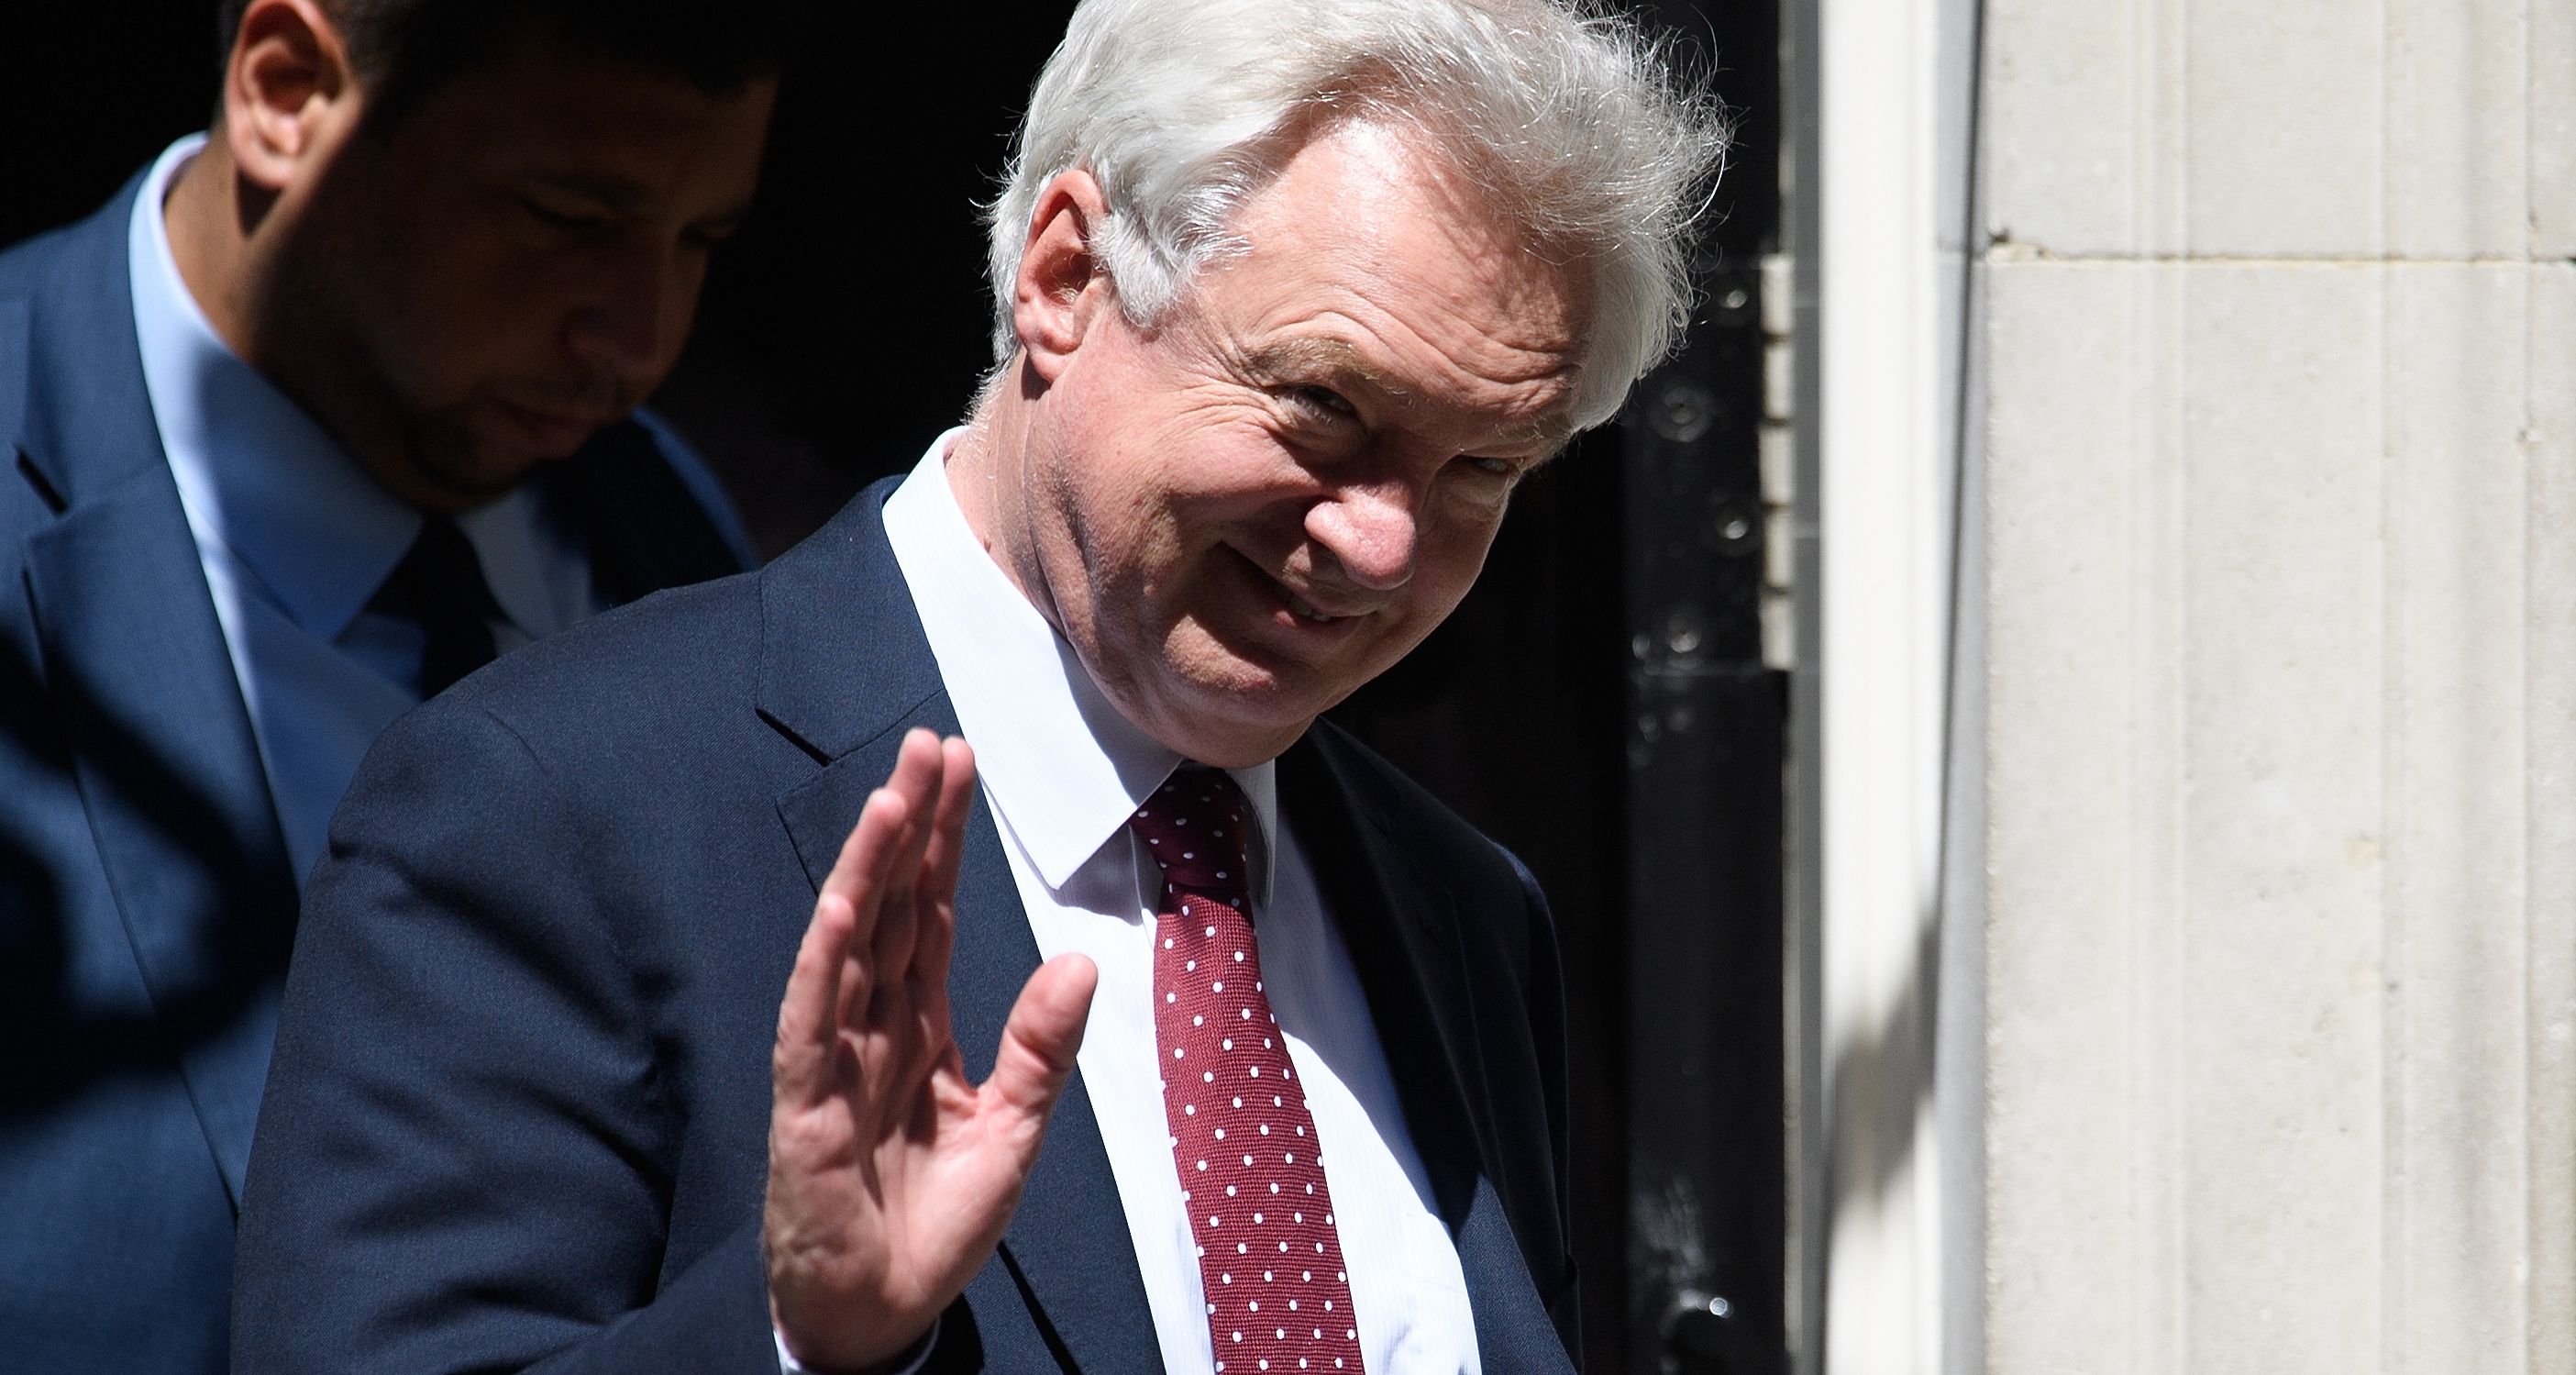 LONDON, ENGLAND - JULY 02: Brexit Secretary David Davis leaves number 10, Downing Street on July 2, 2018 in London, England. (Photo by Leon Neal/Getty Images)